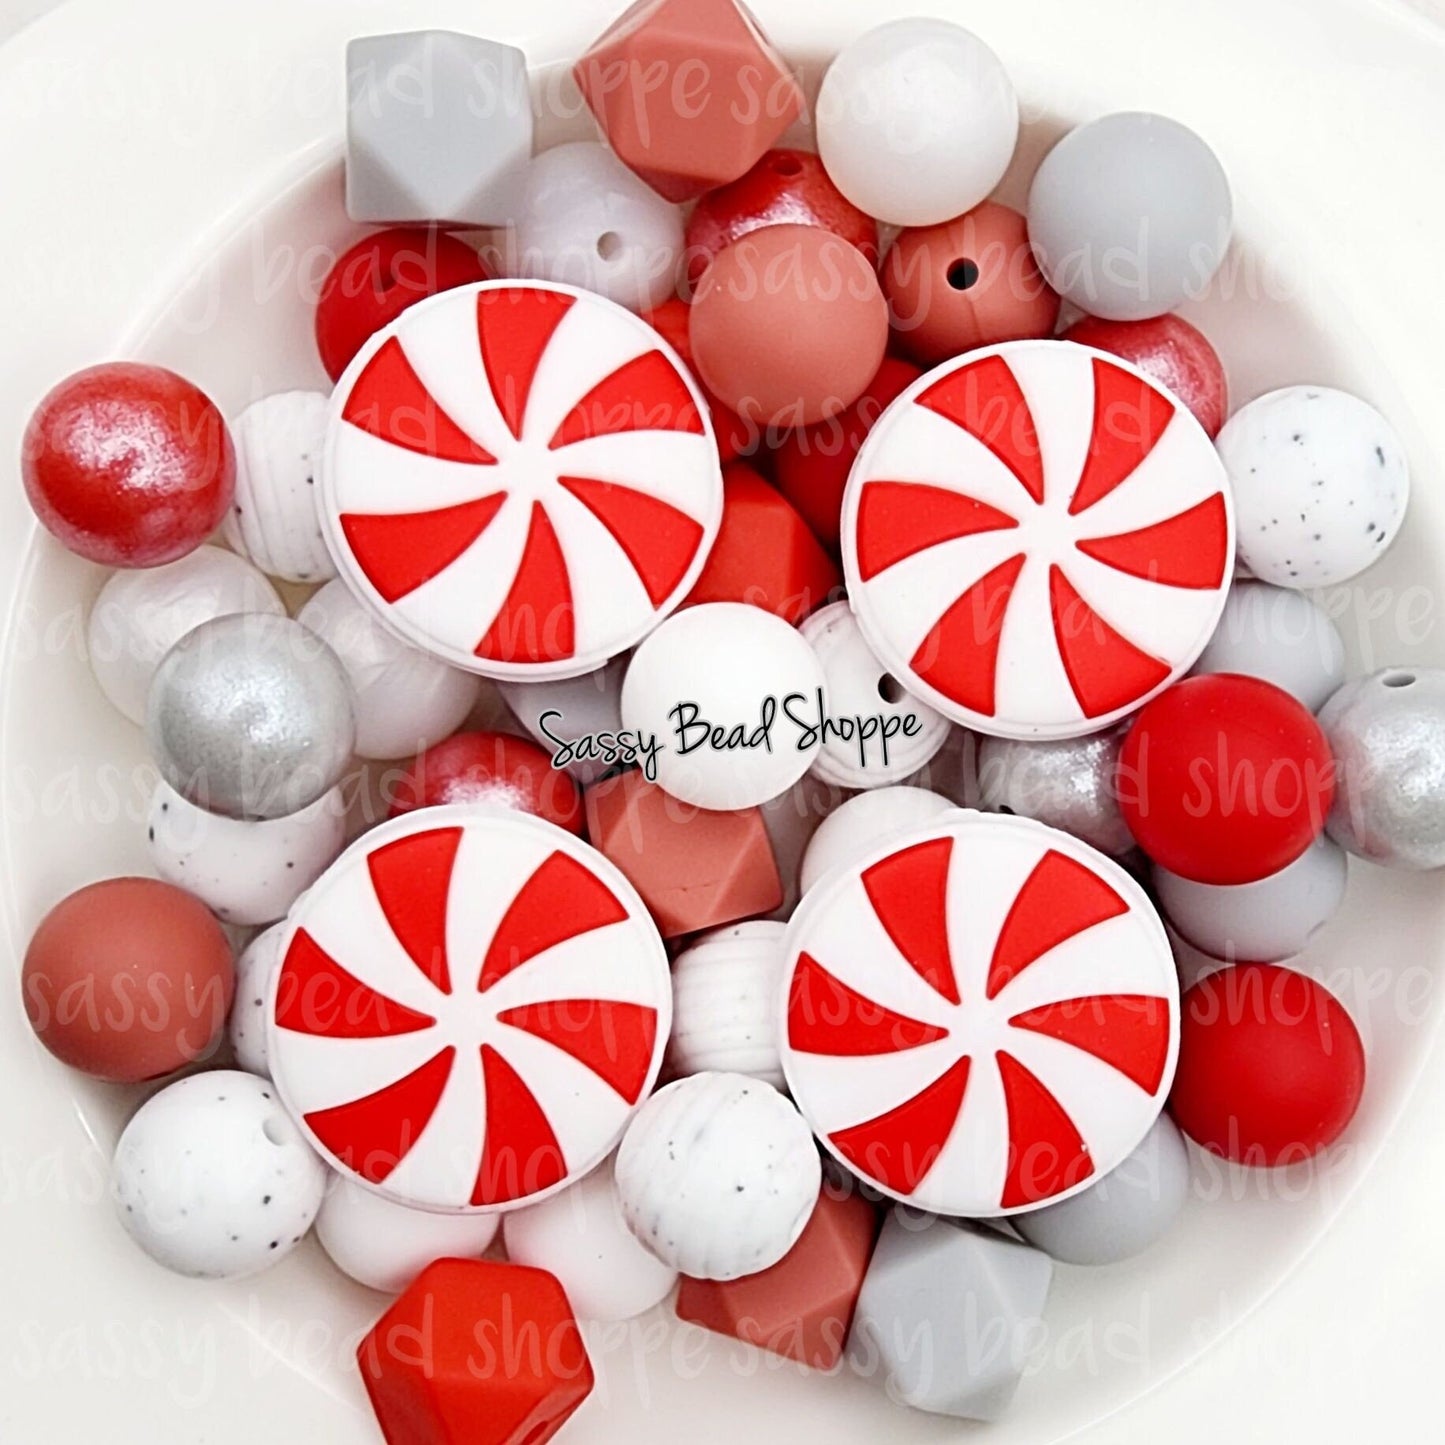 Peppermint Wish Silicone Mix, Set of 26, Bulk Mix Silicone Beads, Beads for Pens, Silicone Beads, Beads for Wristlet, Keychain Lanyard Focal